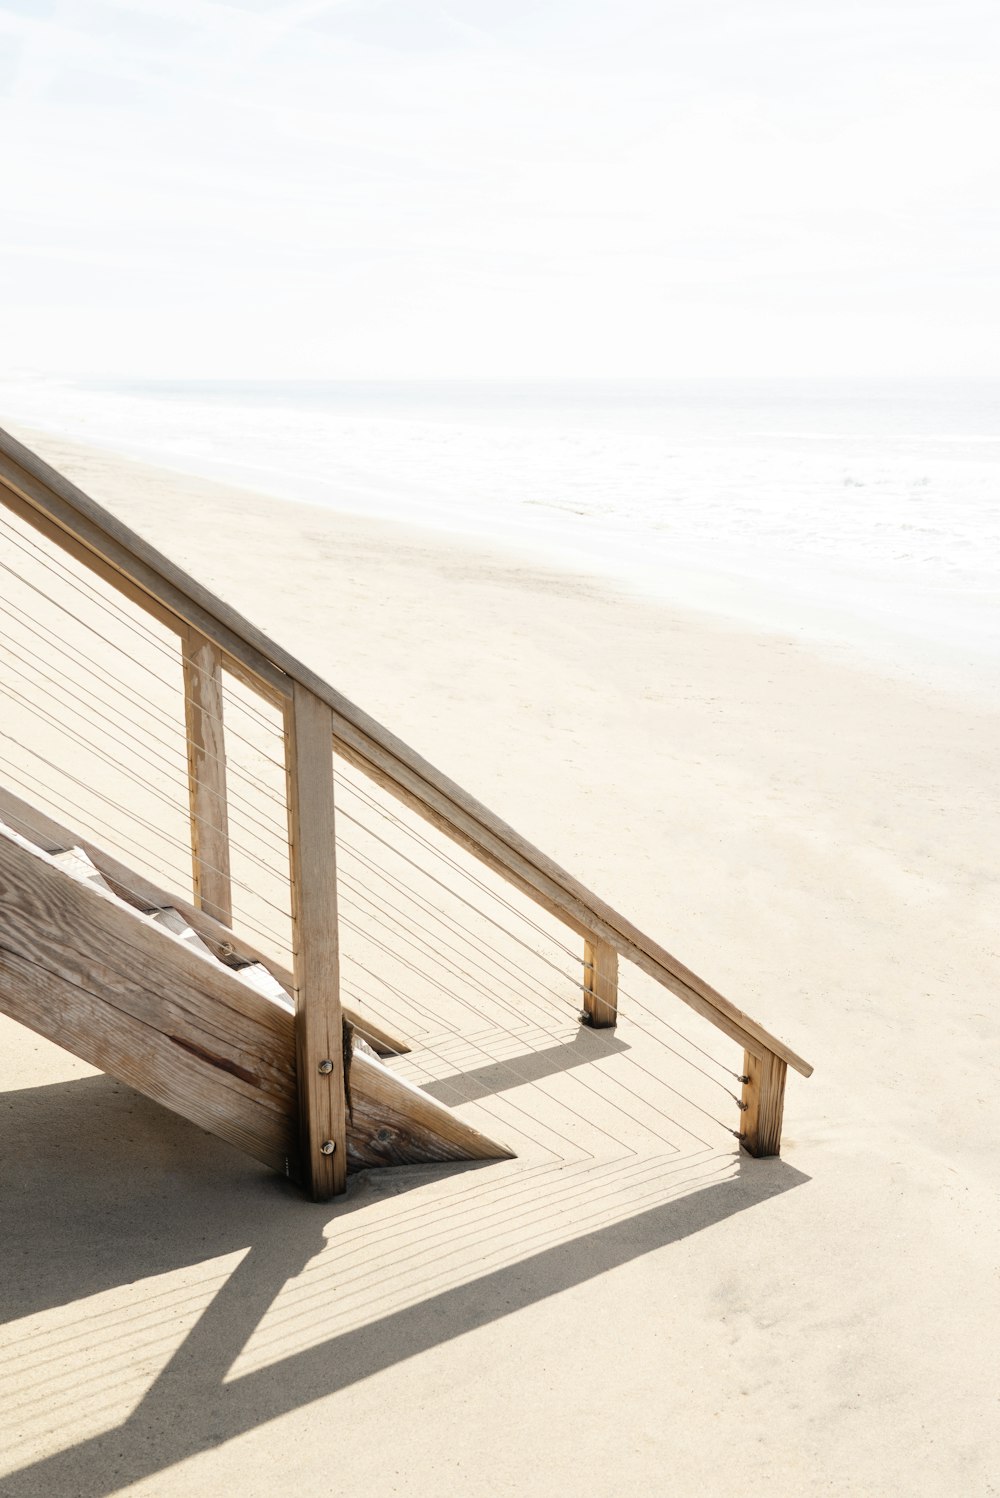 brown wooden staircase on white sand beach during daytime